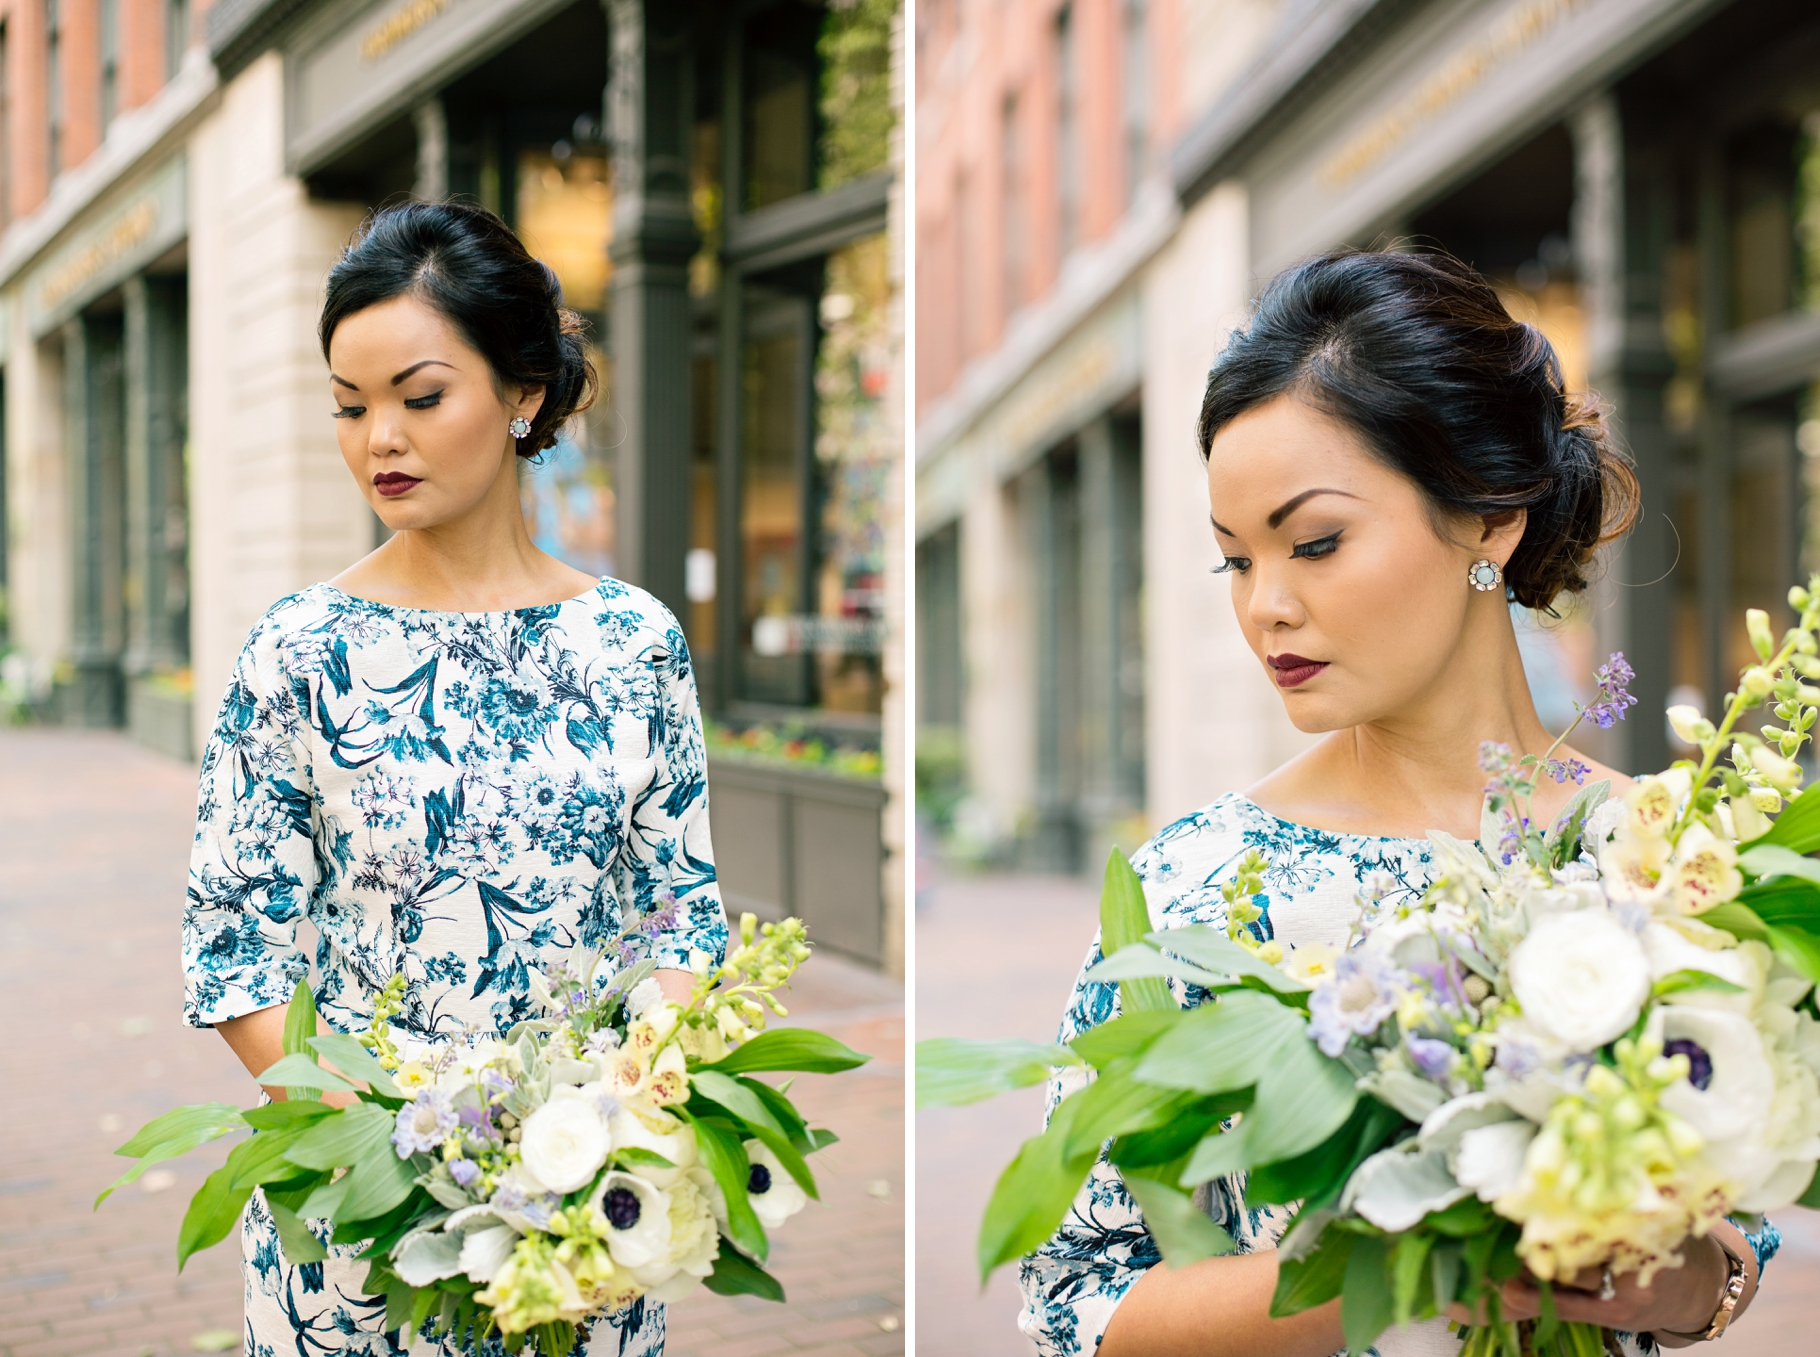 5-Bride-Bridal-Portraits-Wedding-Bouquet-White-Blue-Florals-Occidental-Park-Pioneer-Square-Seattle-Wedding-Day-Photographer-Photography-by-Betty-Elaine